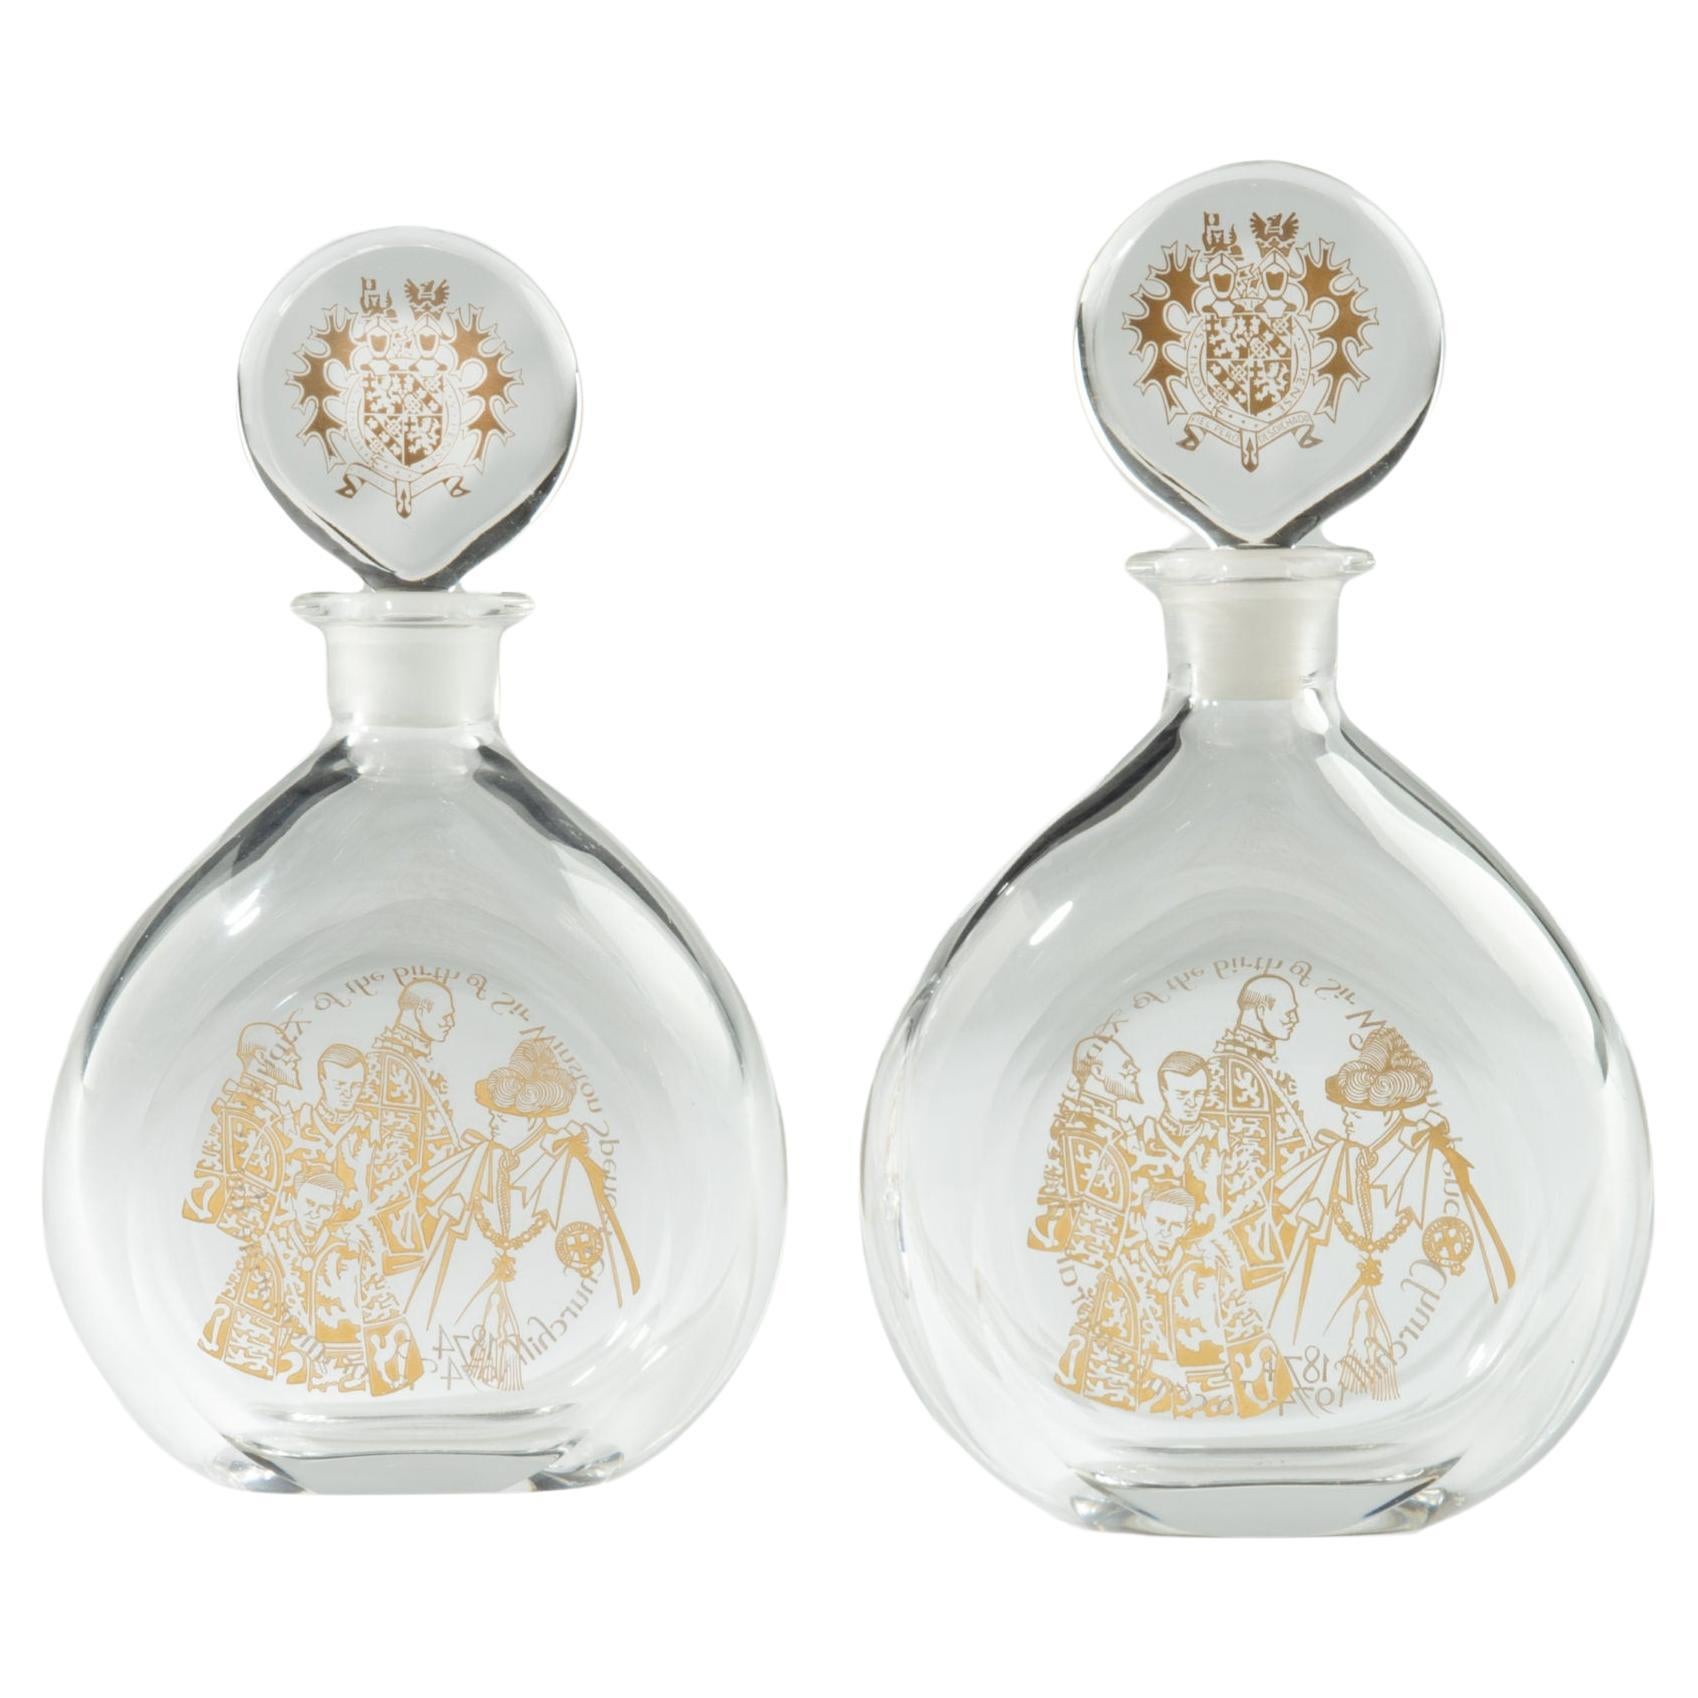 A pair of Sir Winston Churchill glass decanters, by Garrard & Co., 1974 For Sale